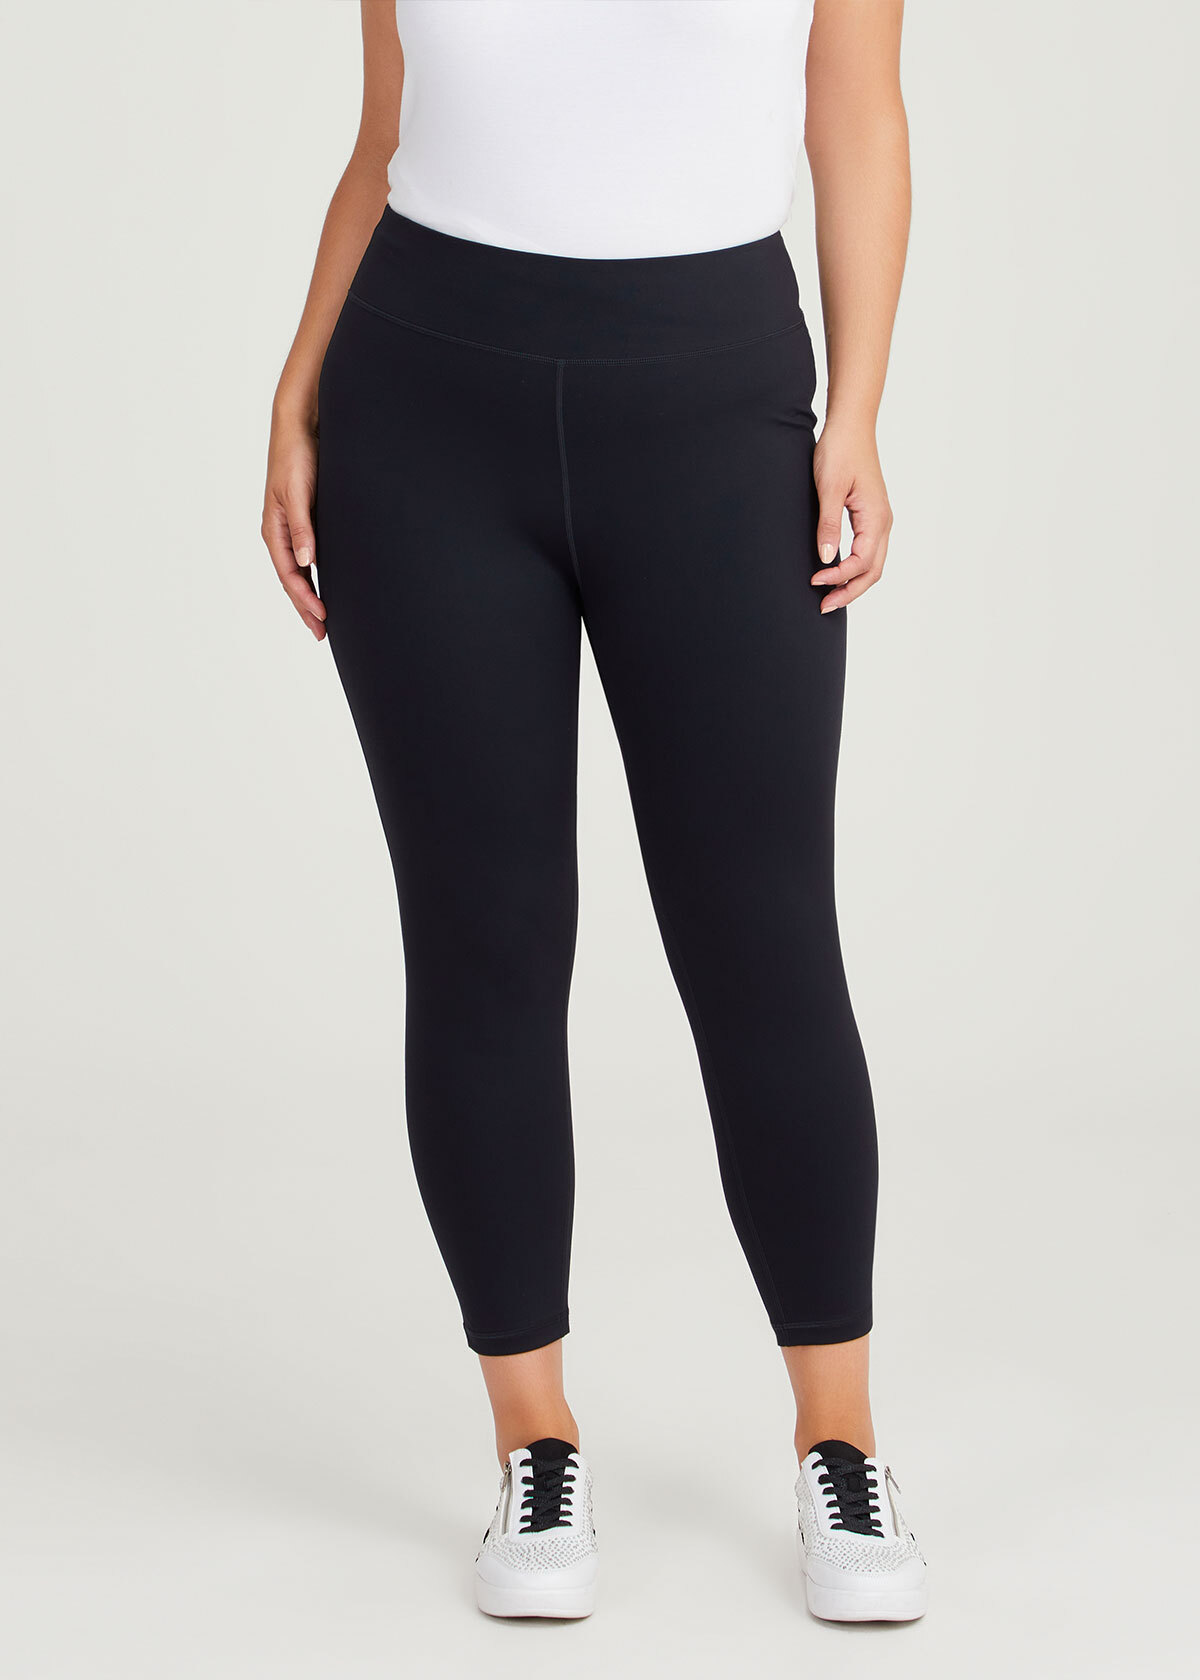 Lingswallow Solid Black Active Pants Size L - 63% off